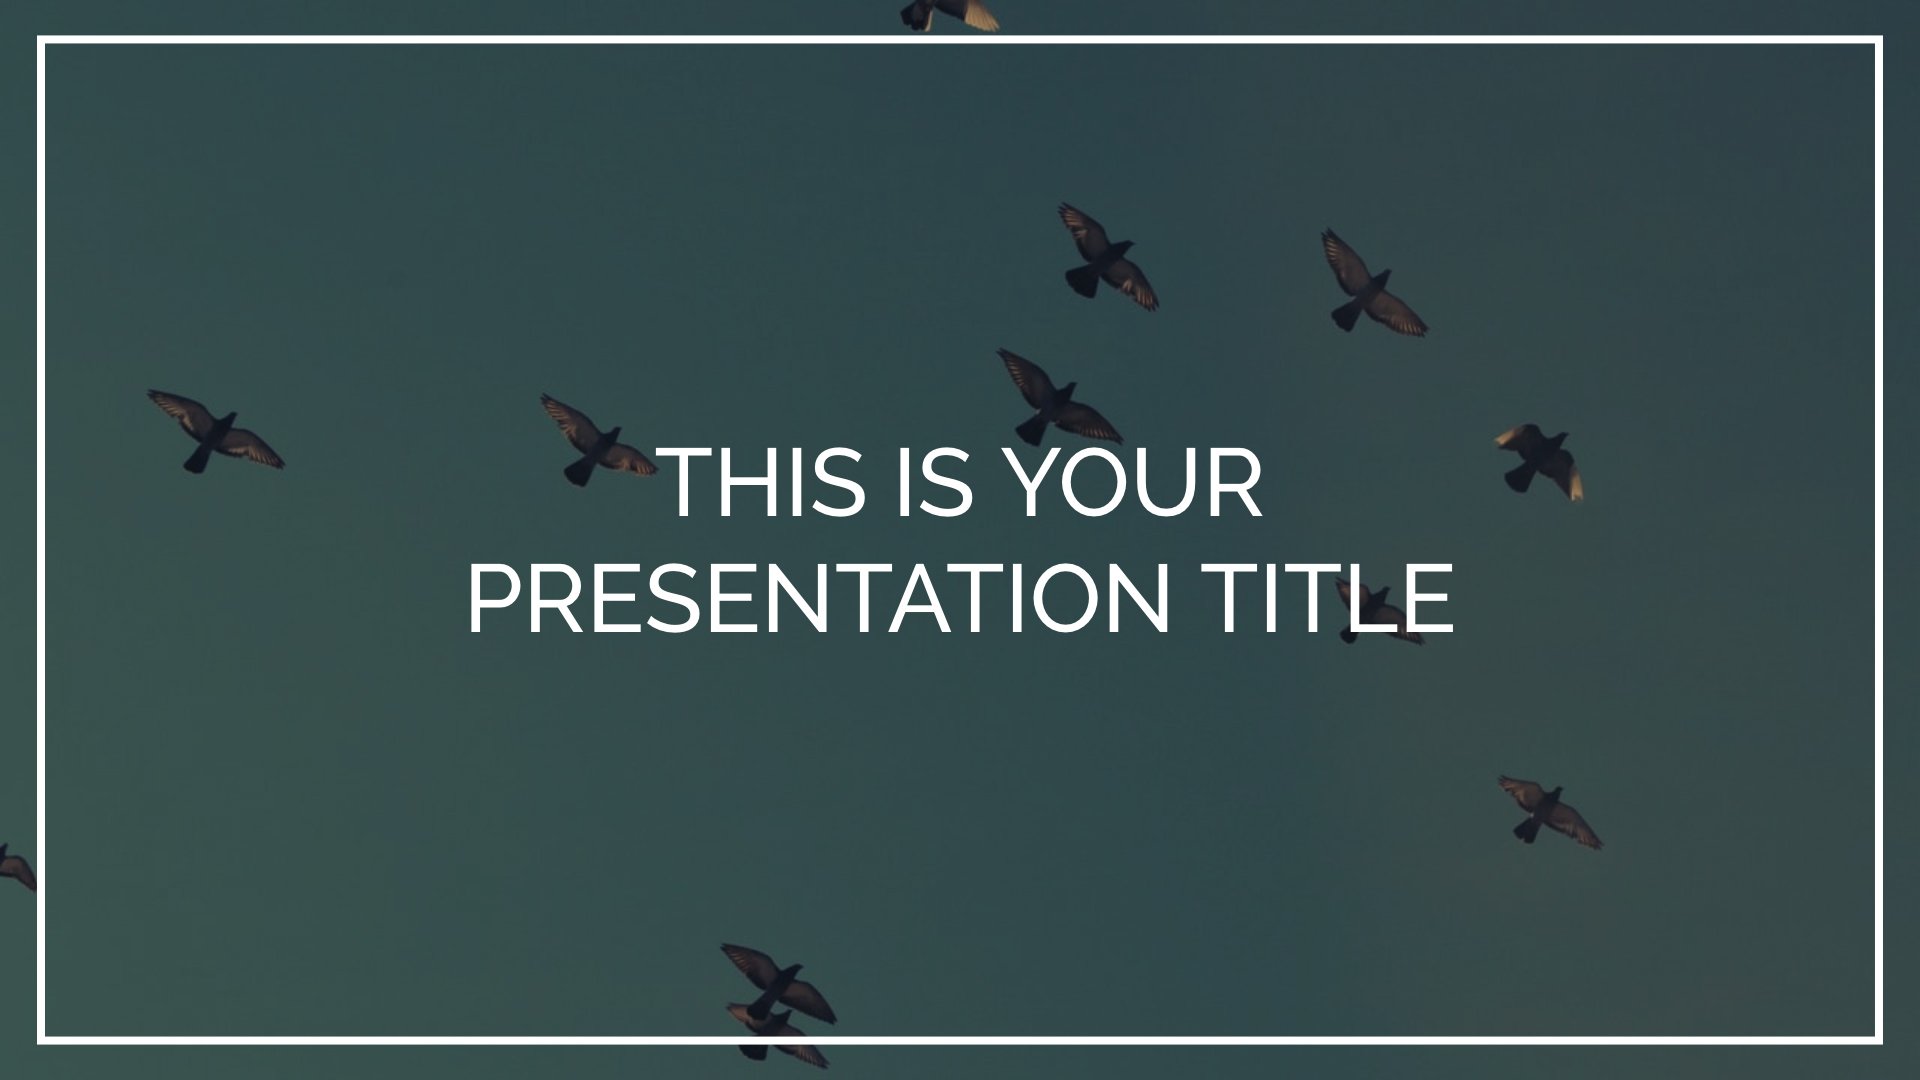 Free inspiring Powerpoint template or Google Slides theme with photo background